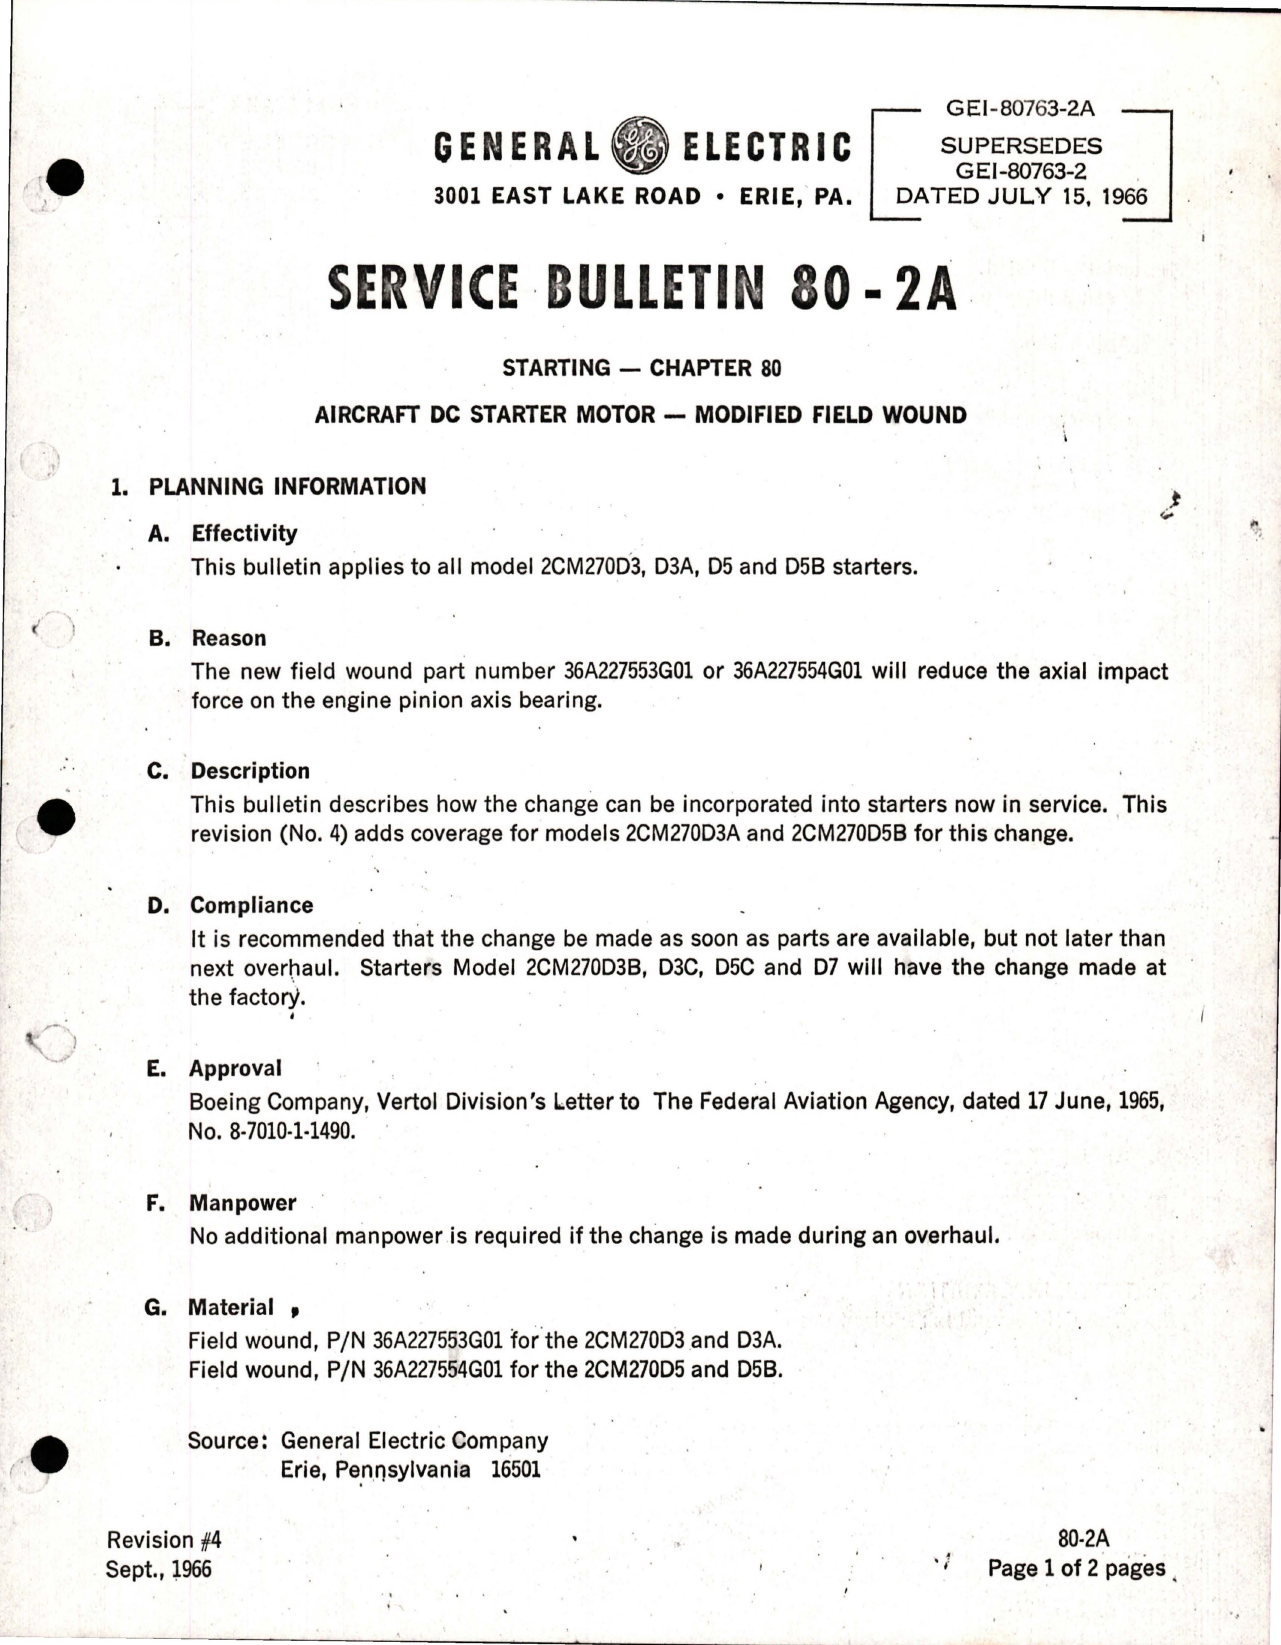 Sample page 1 from AirCorps Library document: Aircraft DC Starter Motor - Modified Field Wound